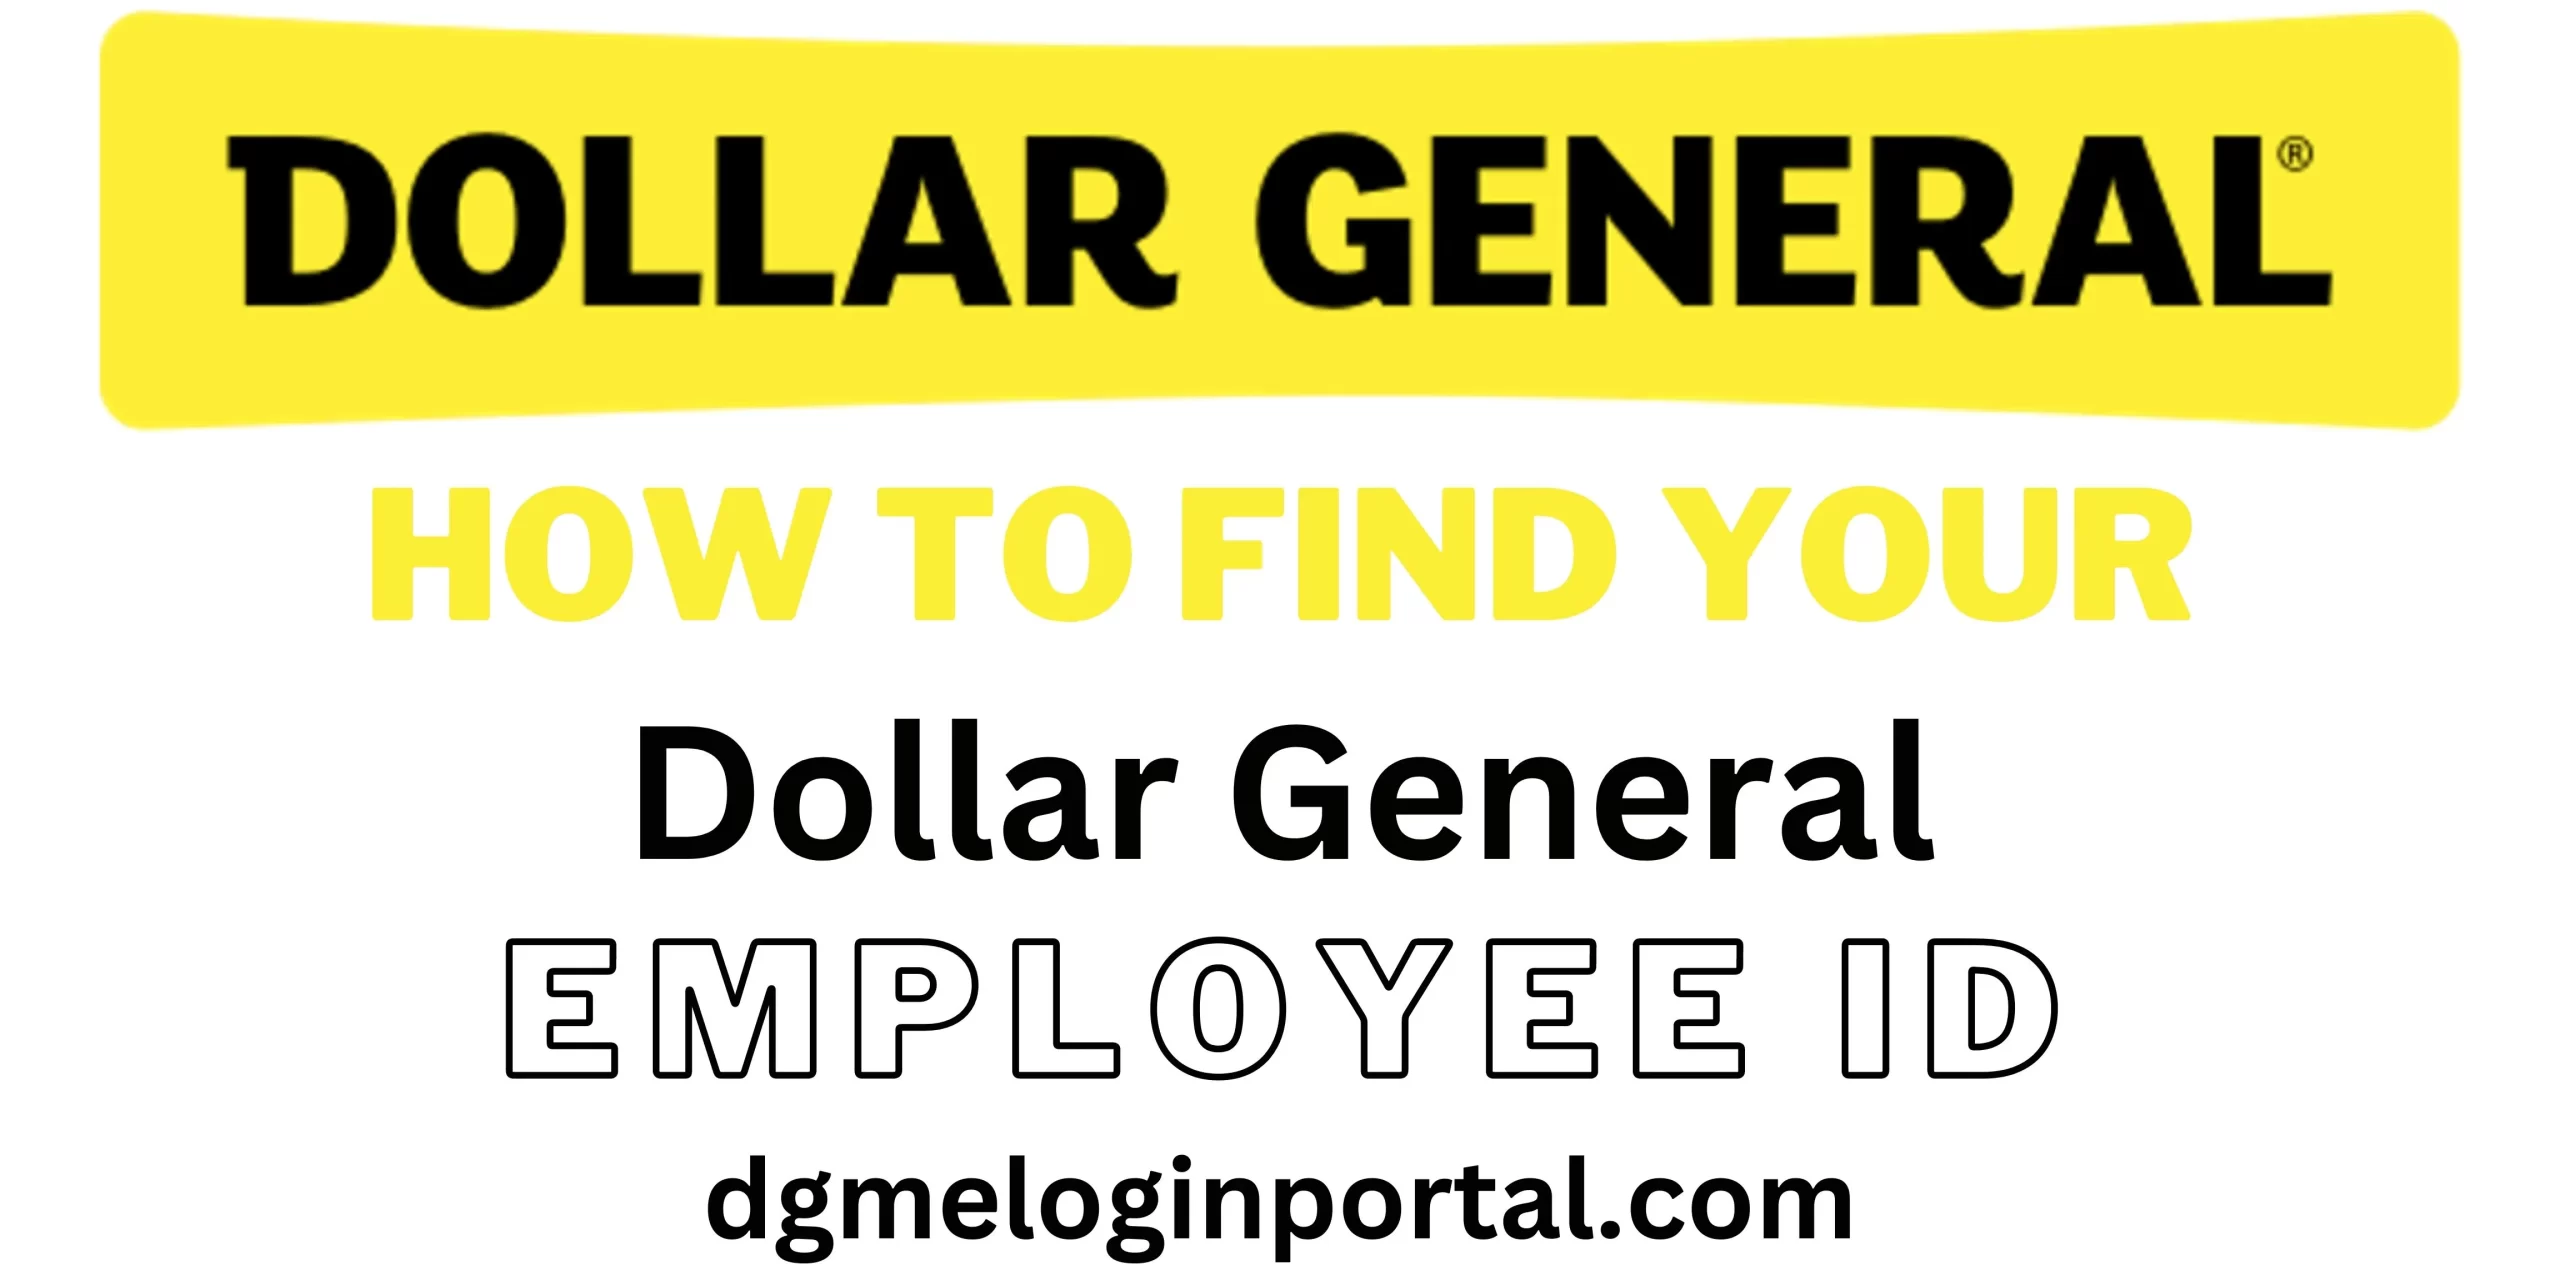 How-to-Find-Your-Dollar-General-Employee-ID